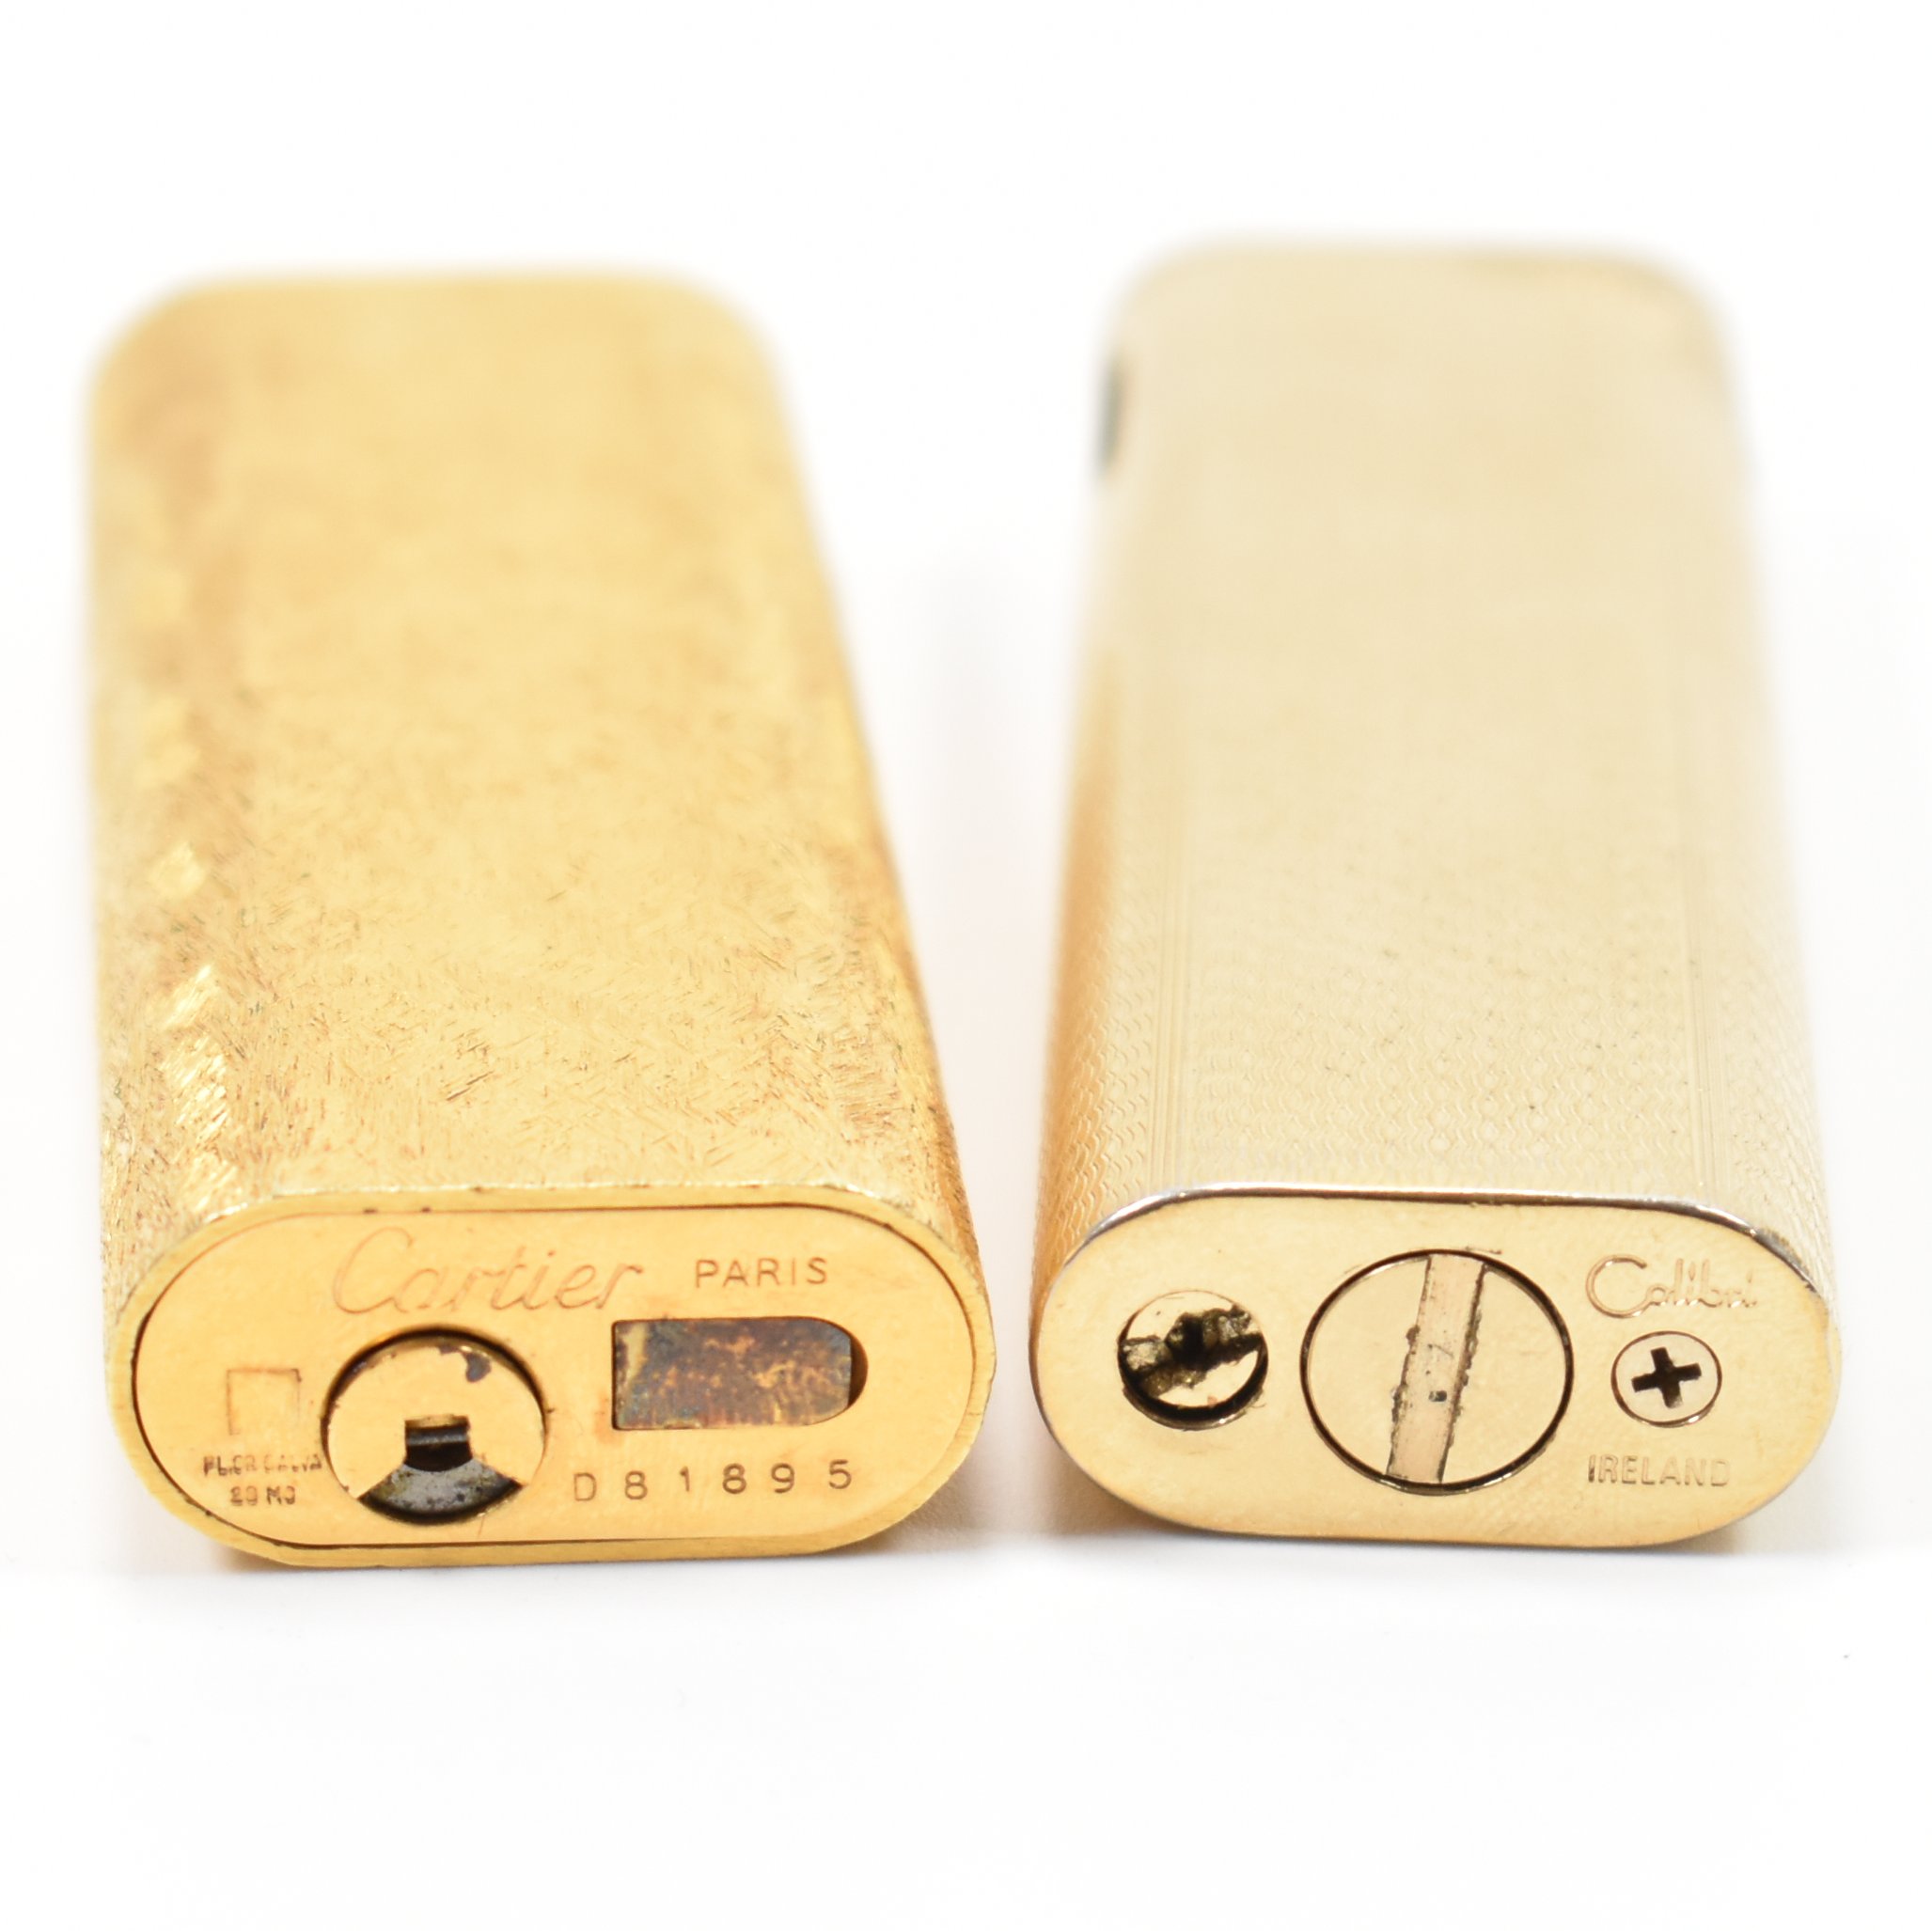 2 VINTAGE ELECTRONIC LIGHTERS - CARTIER & COLIBRI - Image 4 of 5